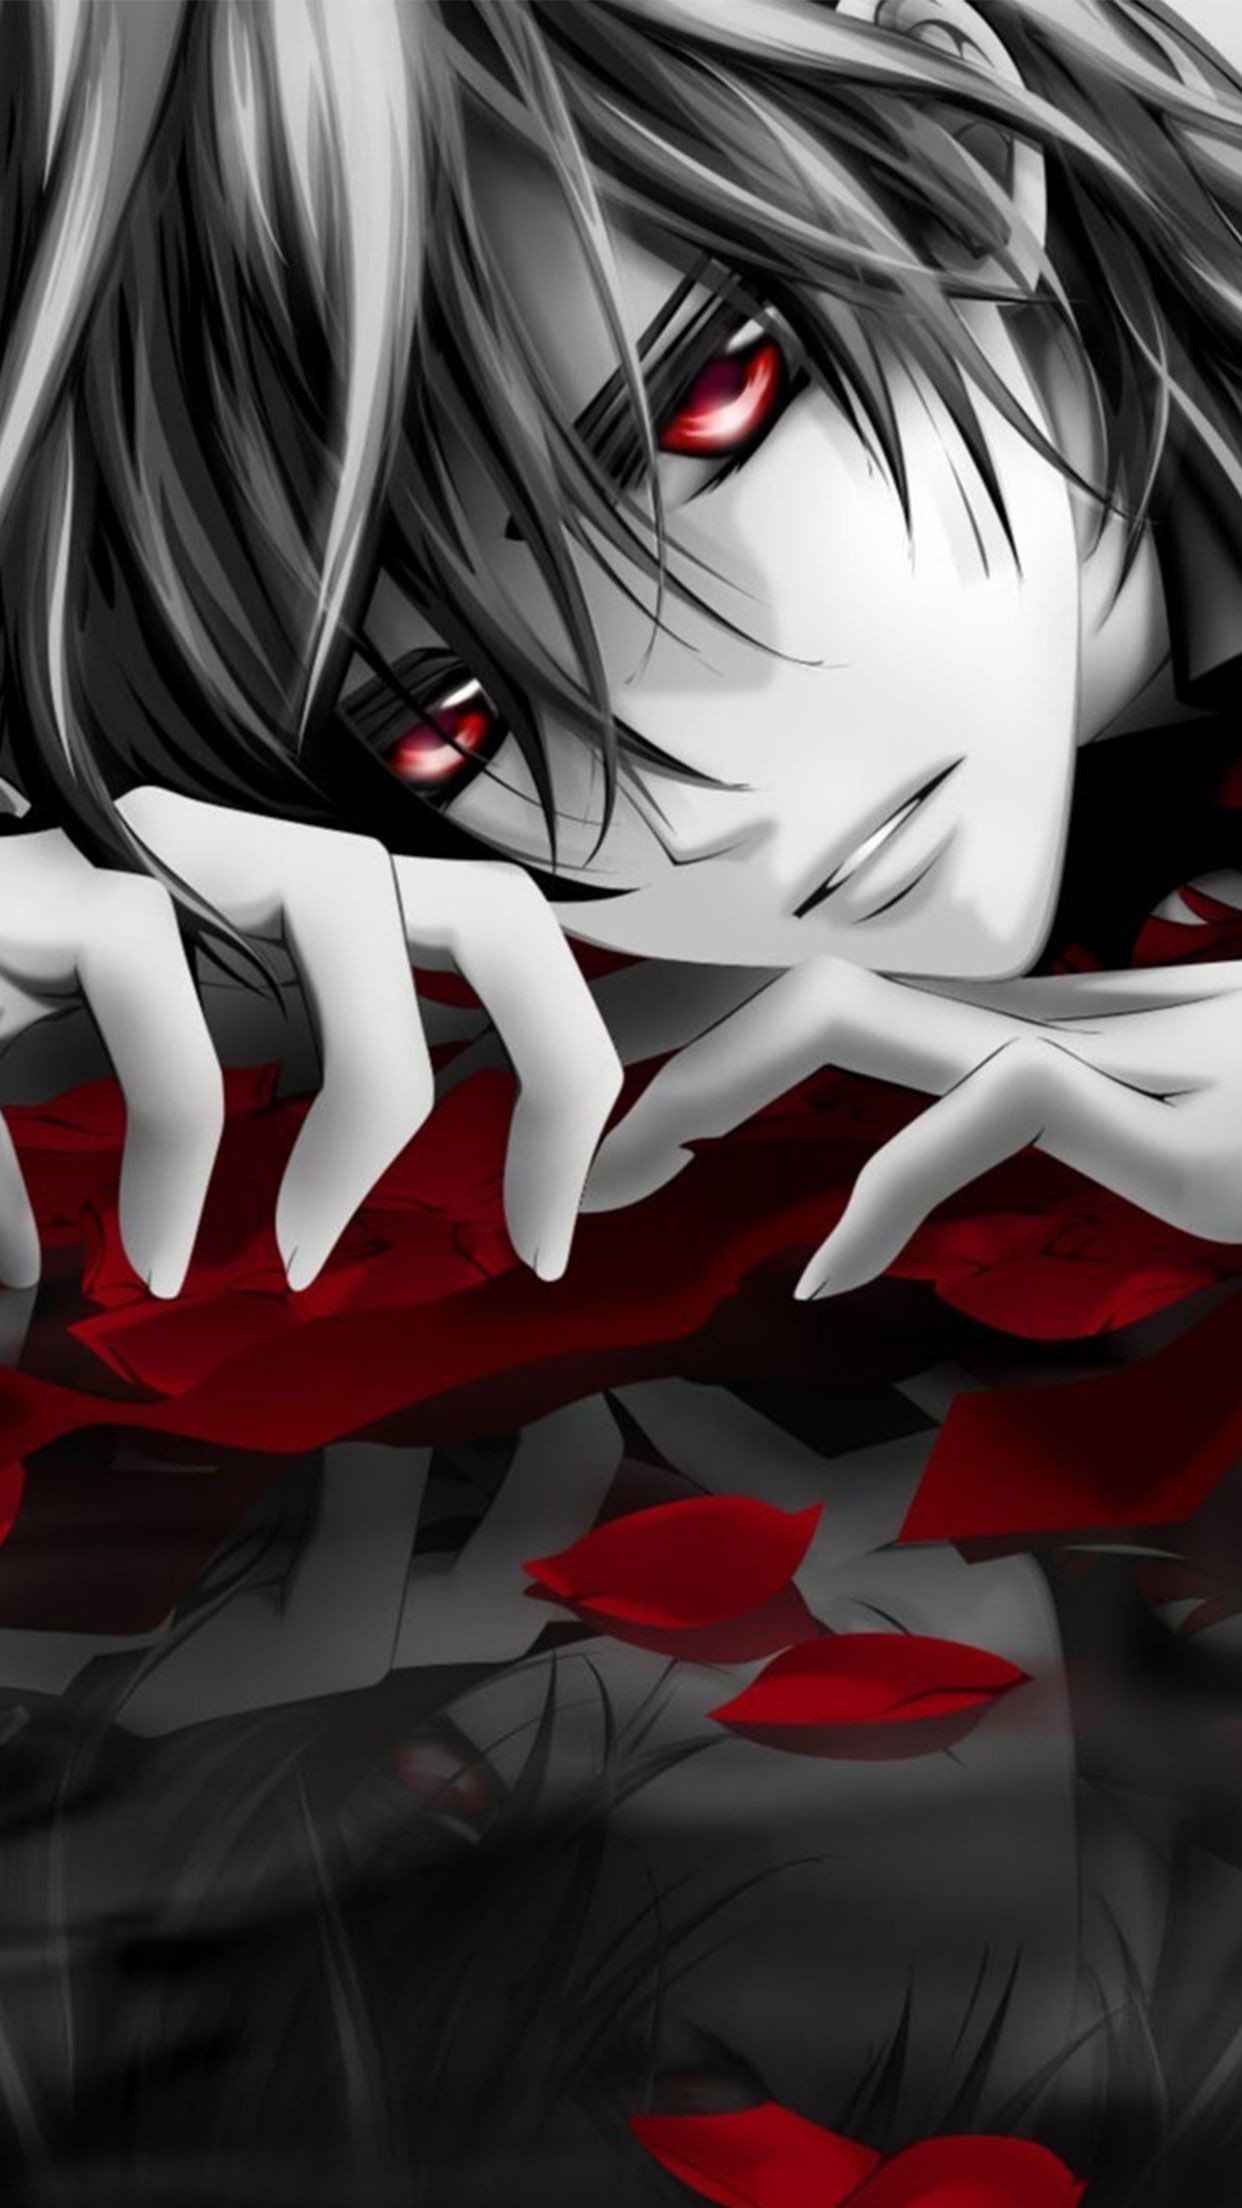 1242x2208 Kaname from Vampire Knight, seriously it's NOT ZERO nice pic though